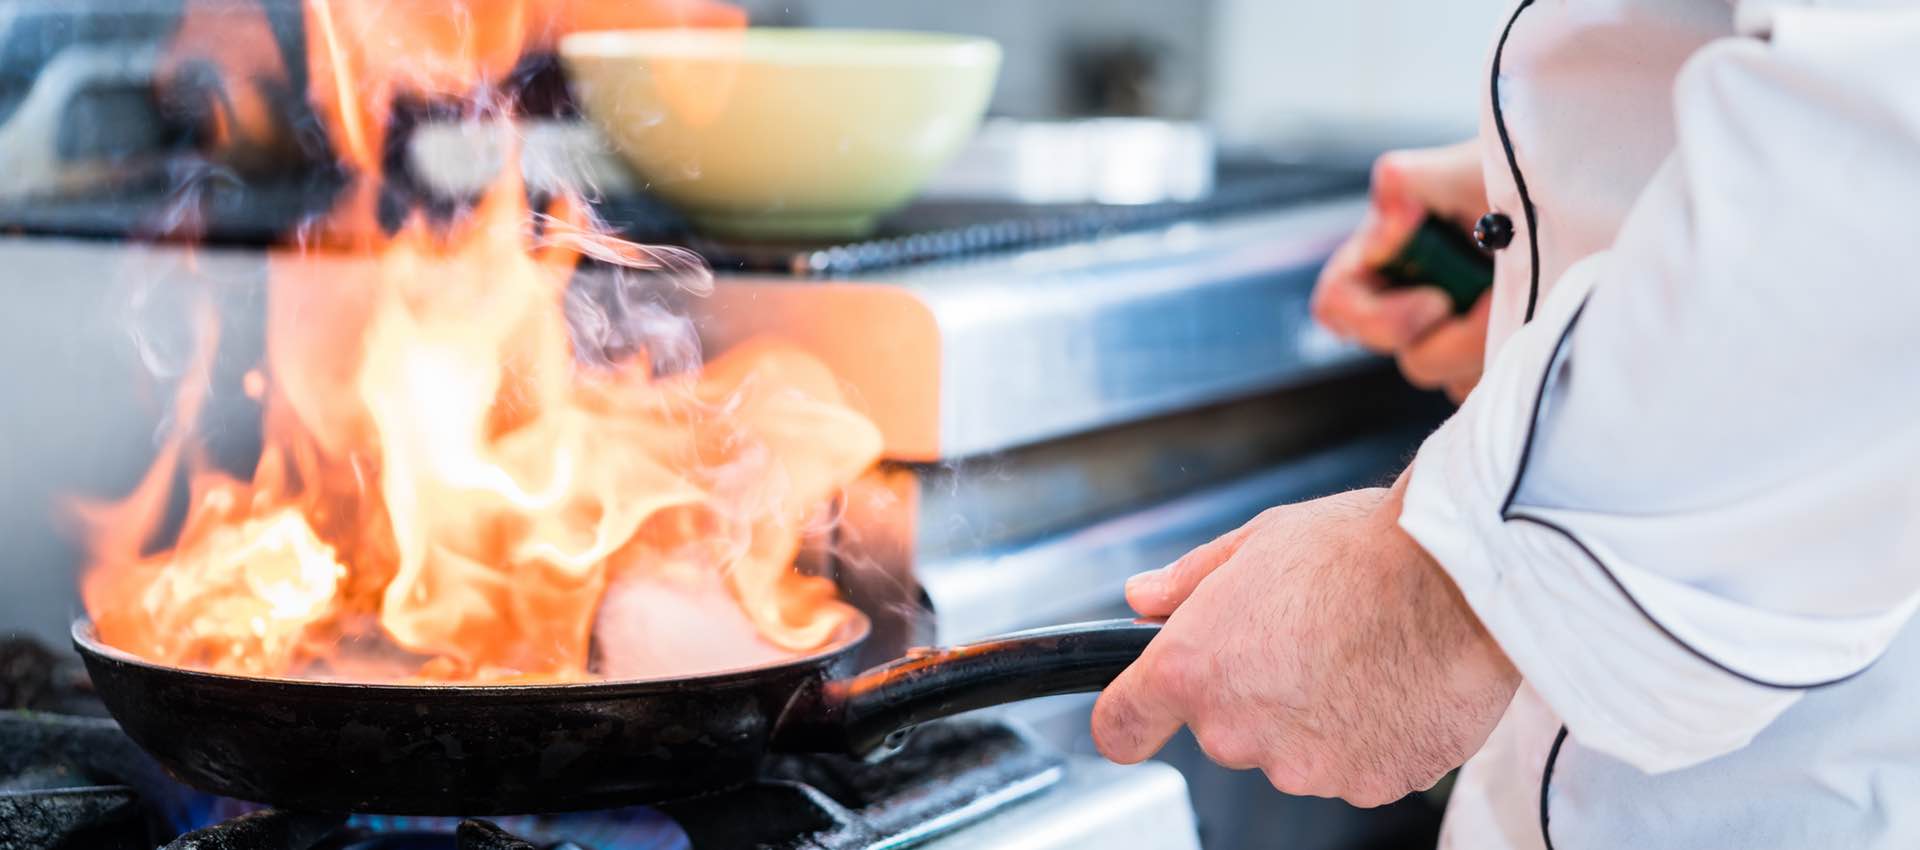 Protecting Your Commercial Kitchen During The Holidays